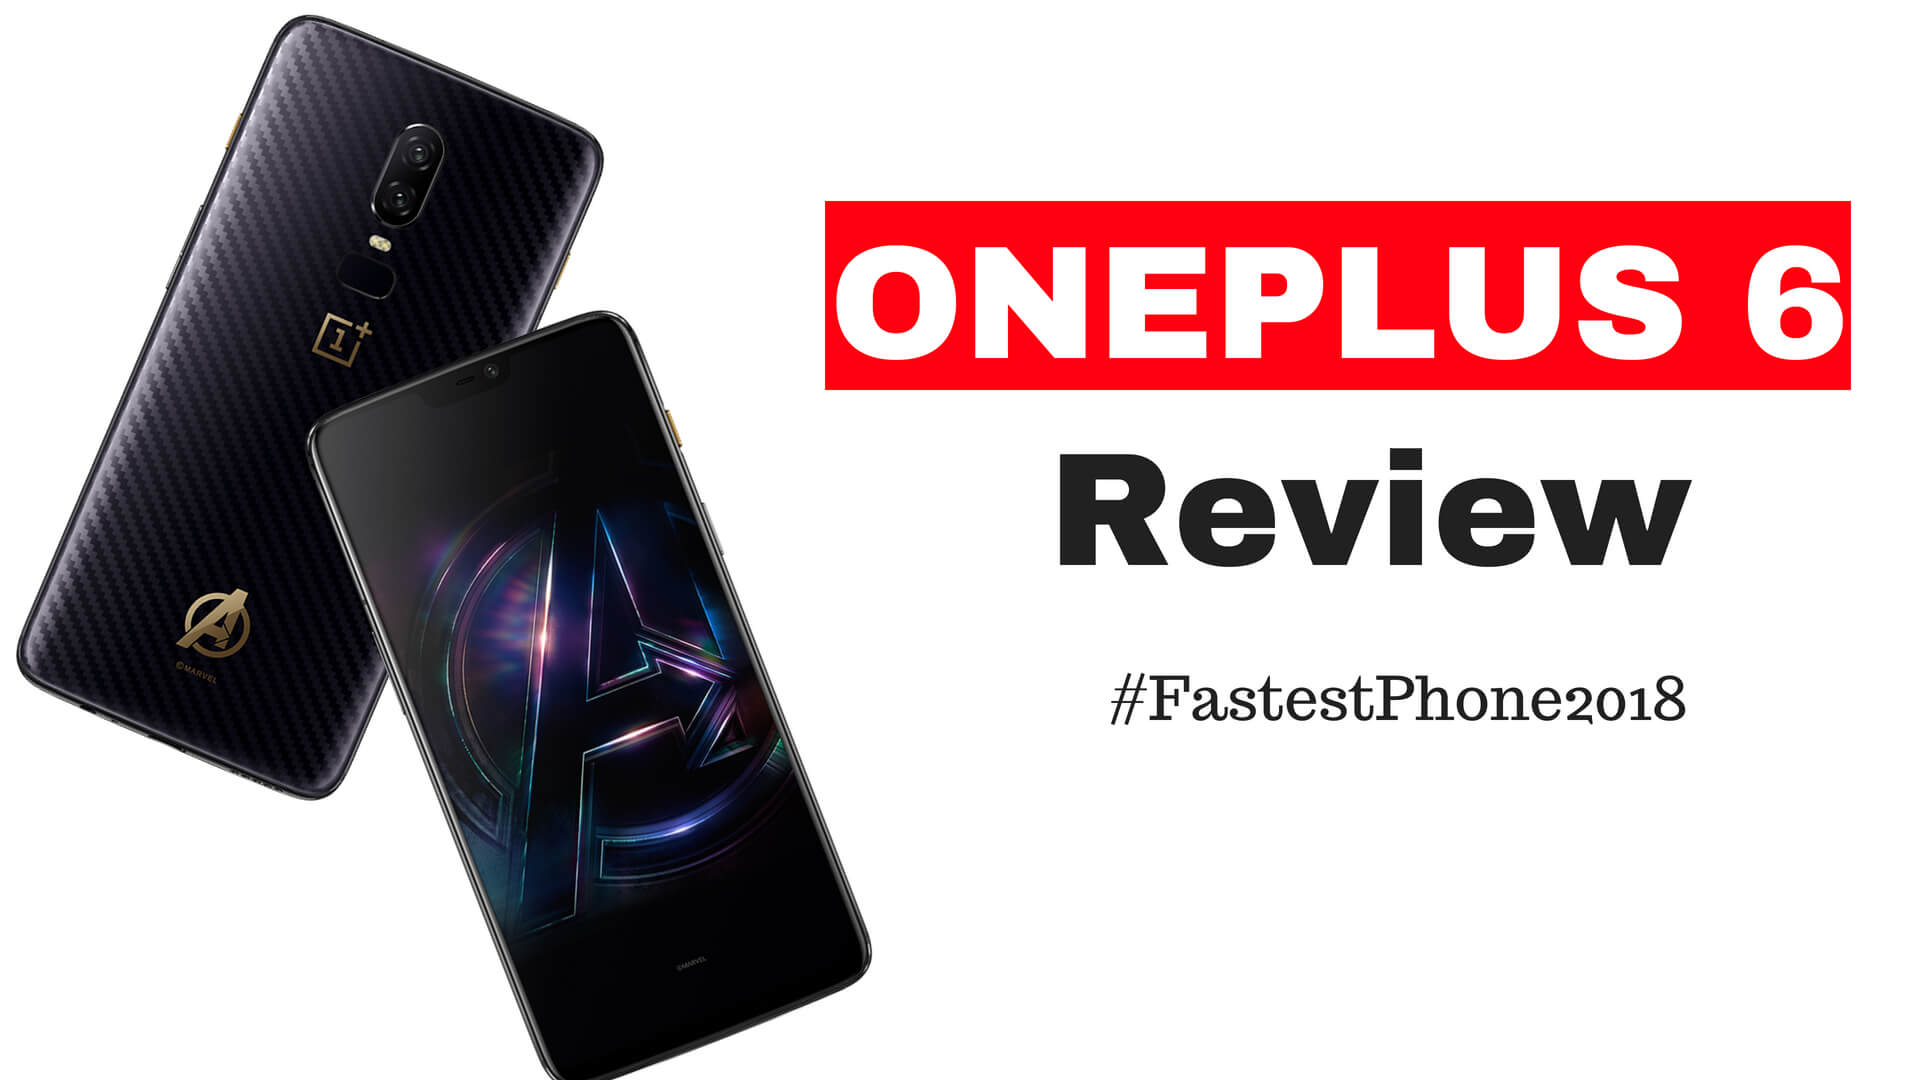 Oneplus 6 review